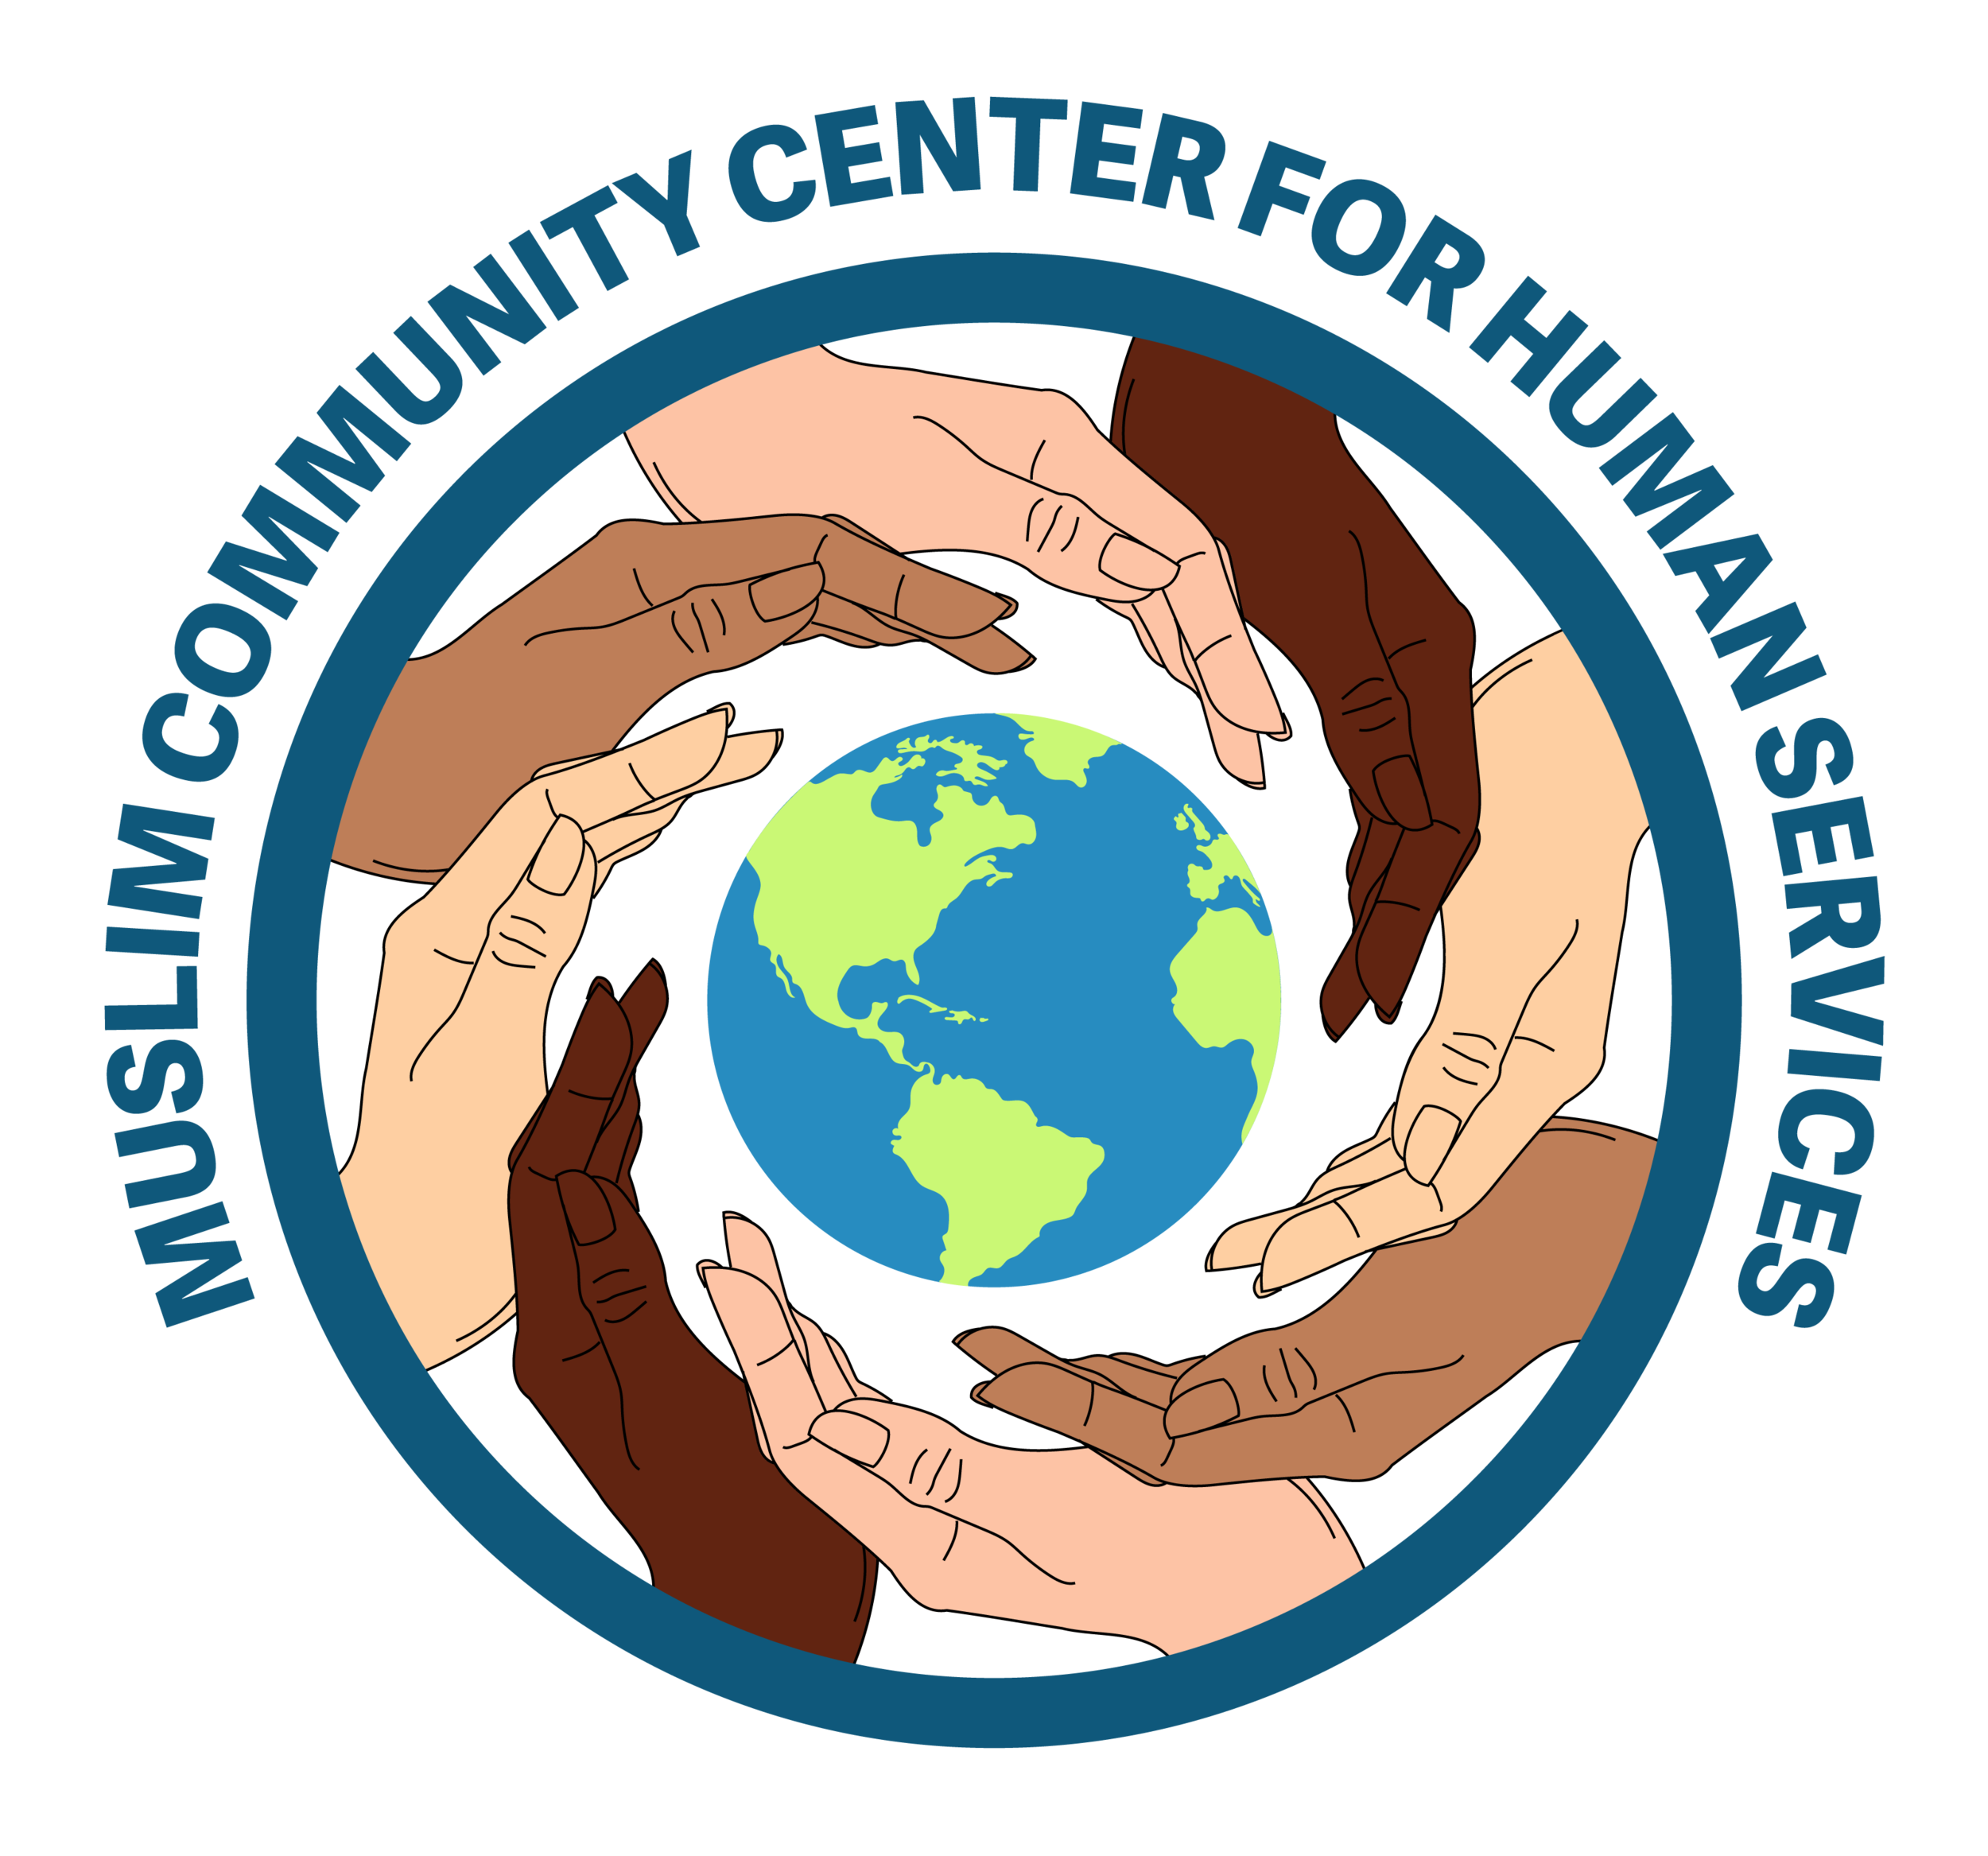 Muslim Community Center for Human Services